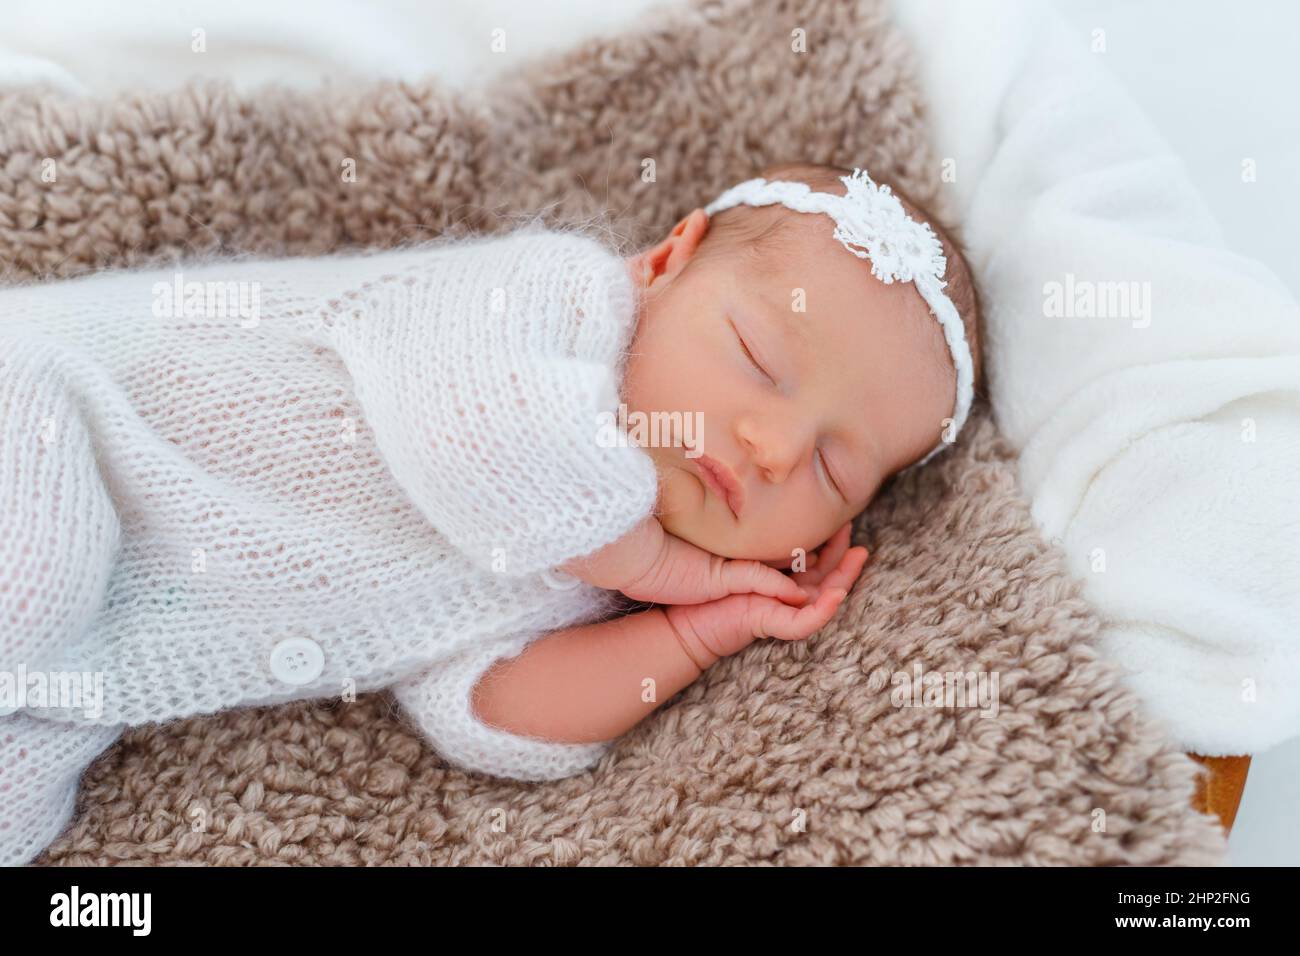 Newborn baby in white knitted suit sleep in wooden basket. Child resting in cute pose. Tiny girl with tender headband on head. Creative infant photogr Stock Photo